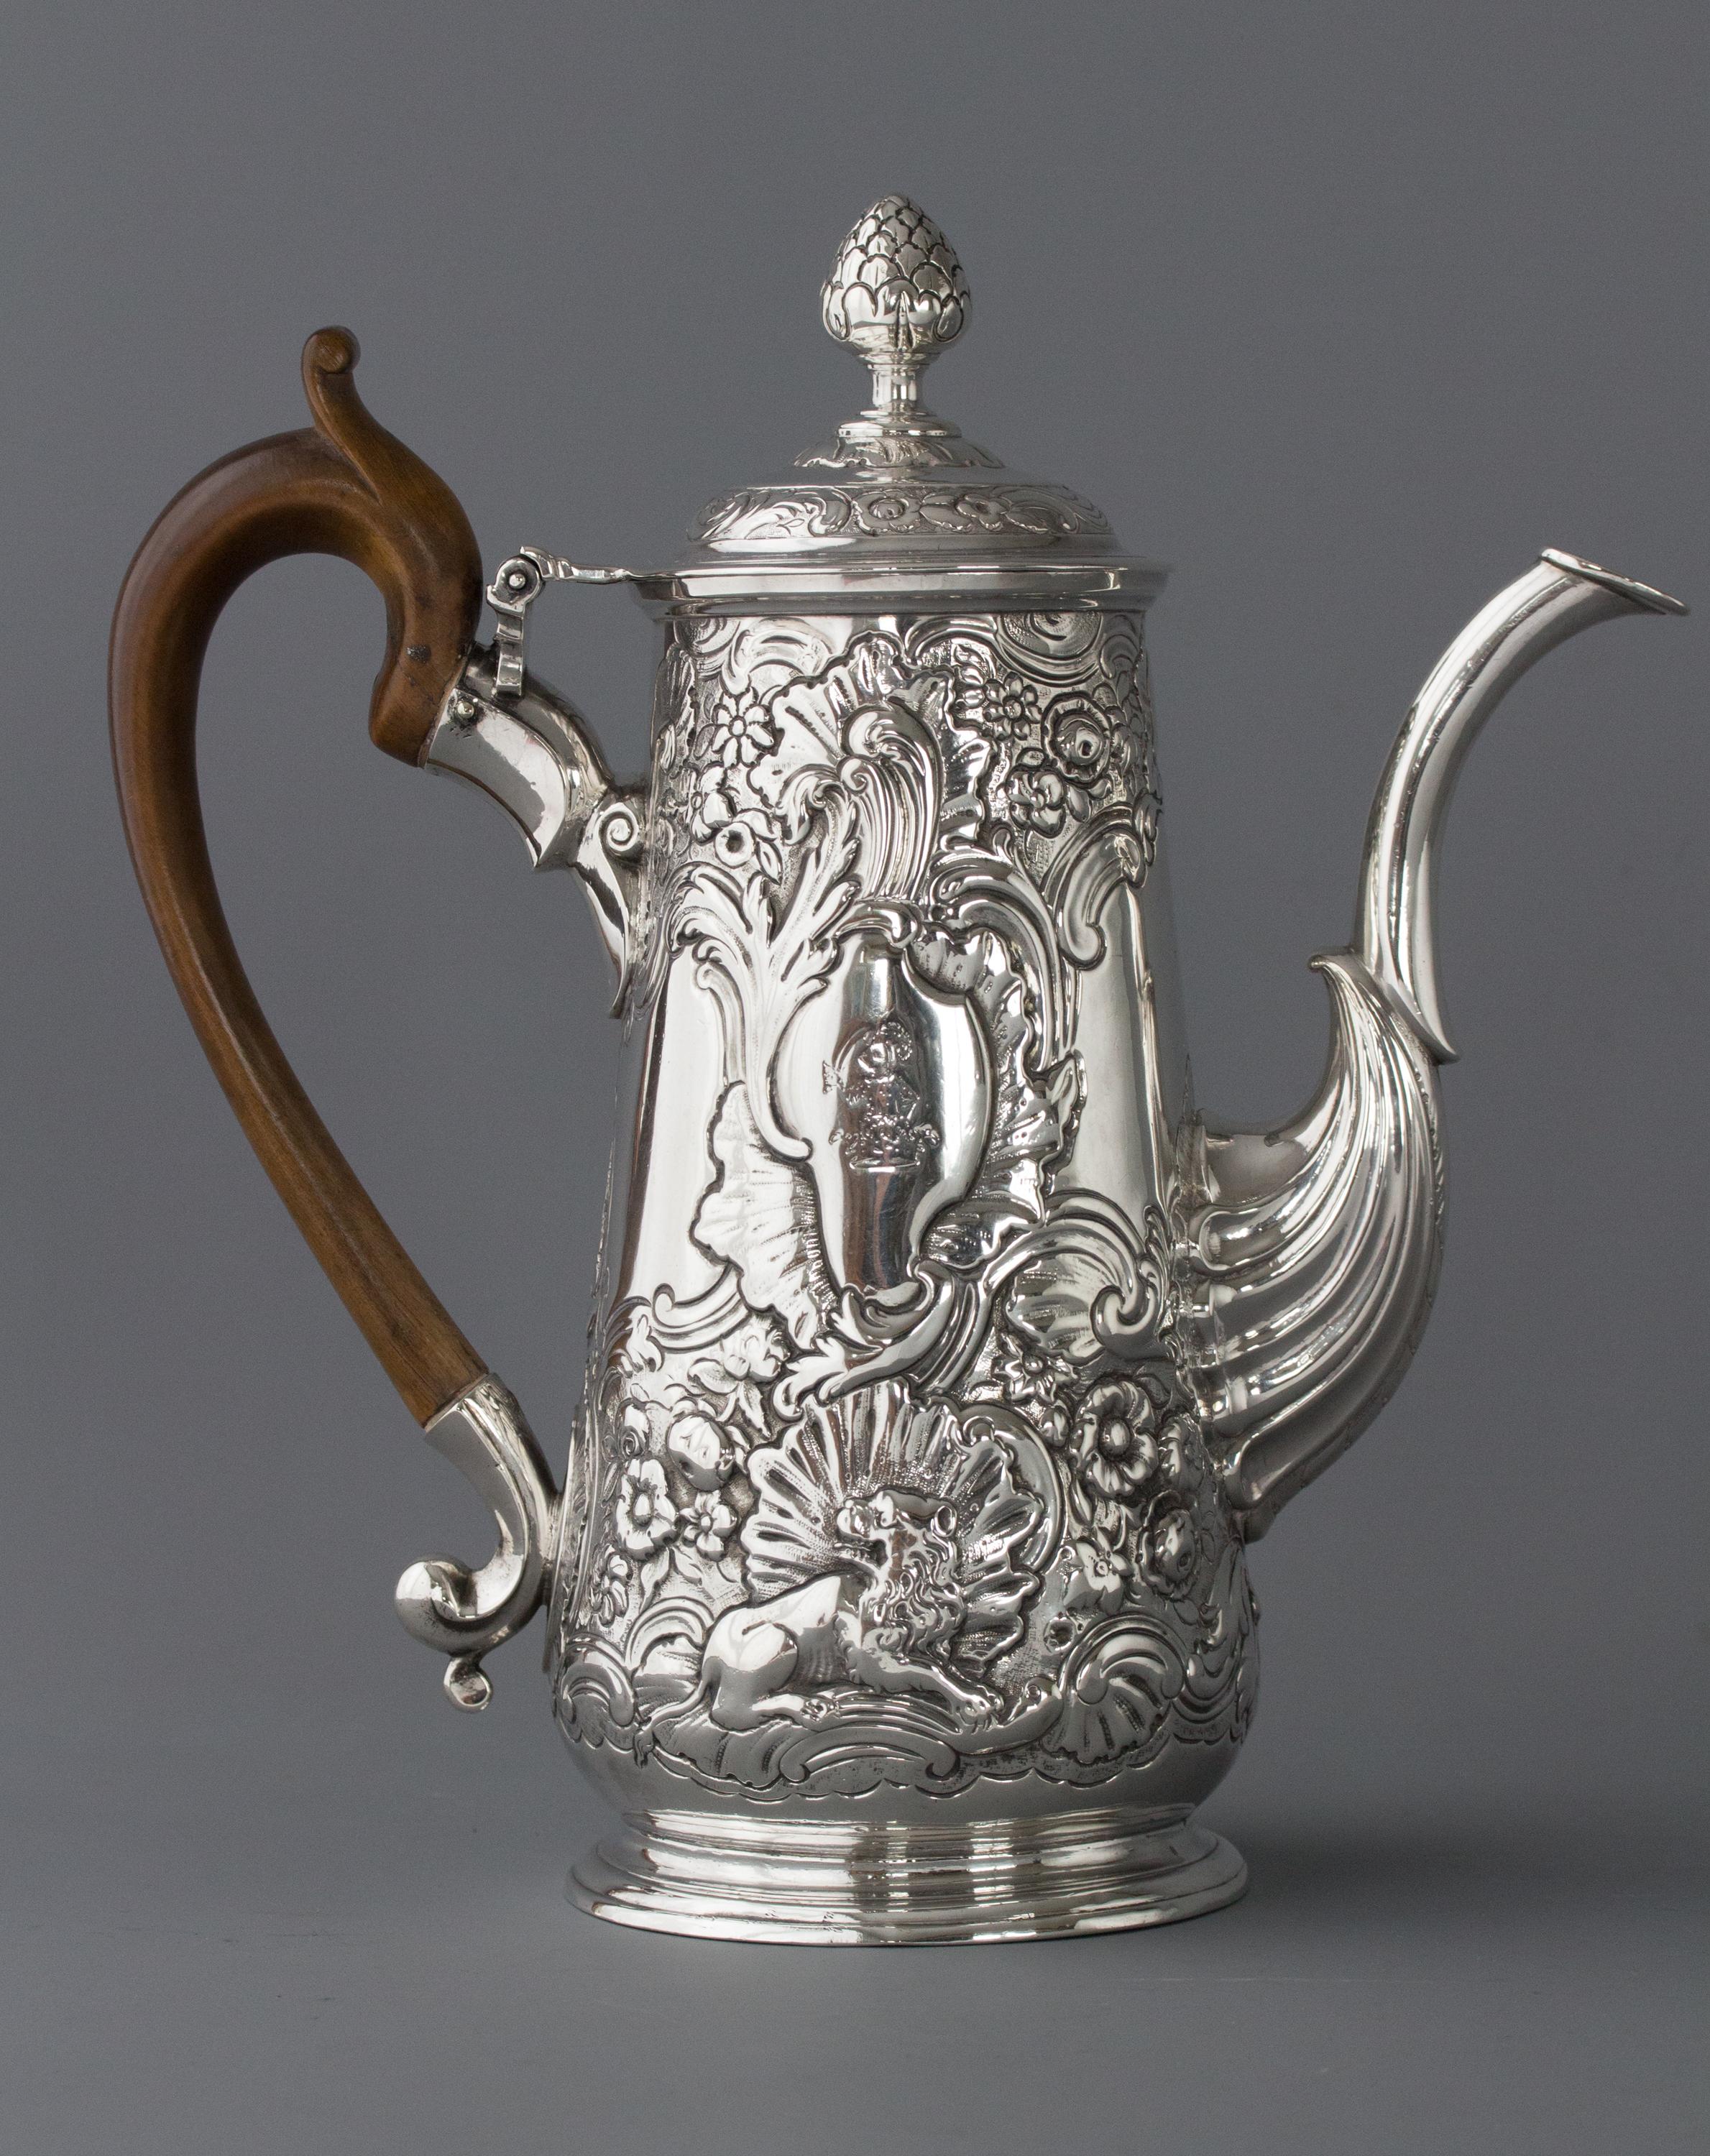 An exceptional quality Irish George II silver coffee pot. Of tapering baluster form with high embossed and chased decoration of lion and eagle with floral and scroll patterns above. Cast leaf-capped spout, a high raised floral decorated band to the